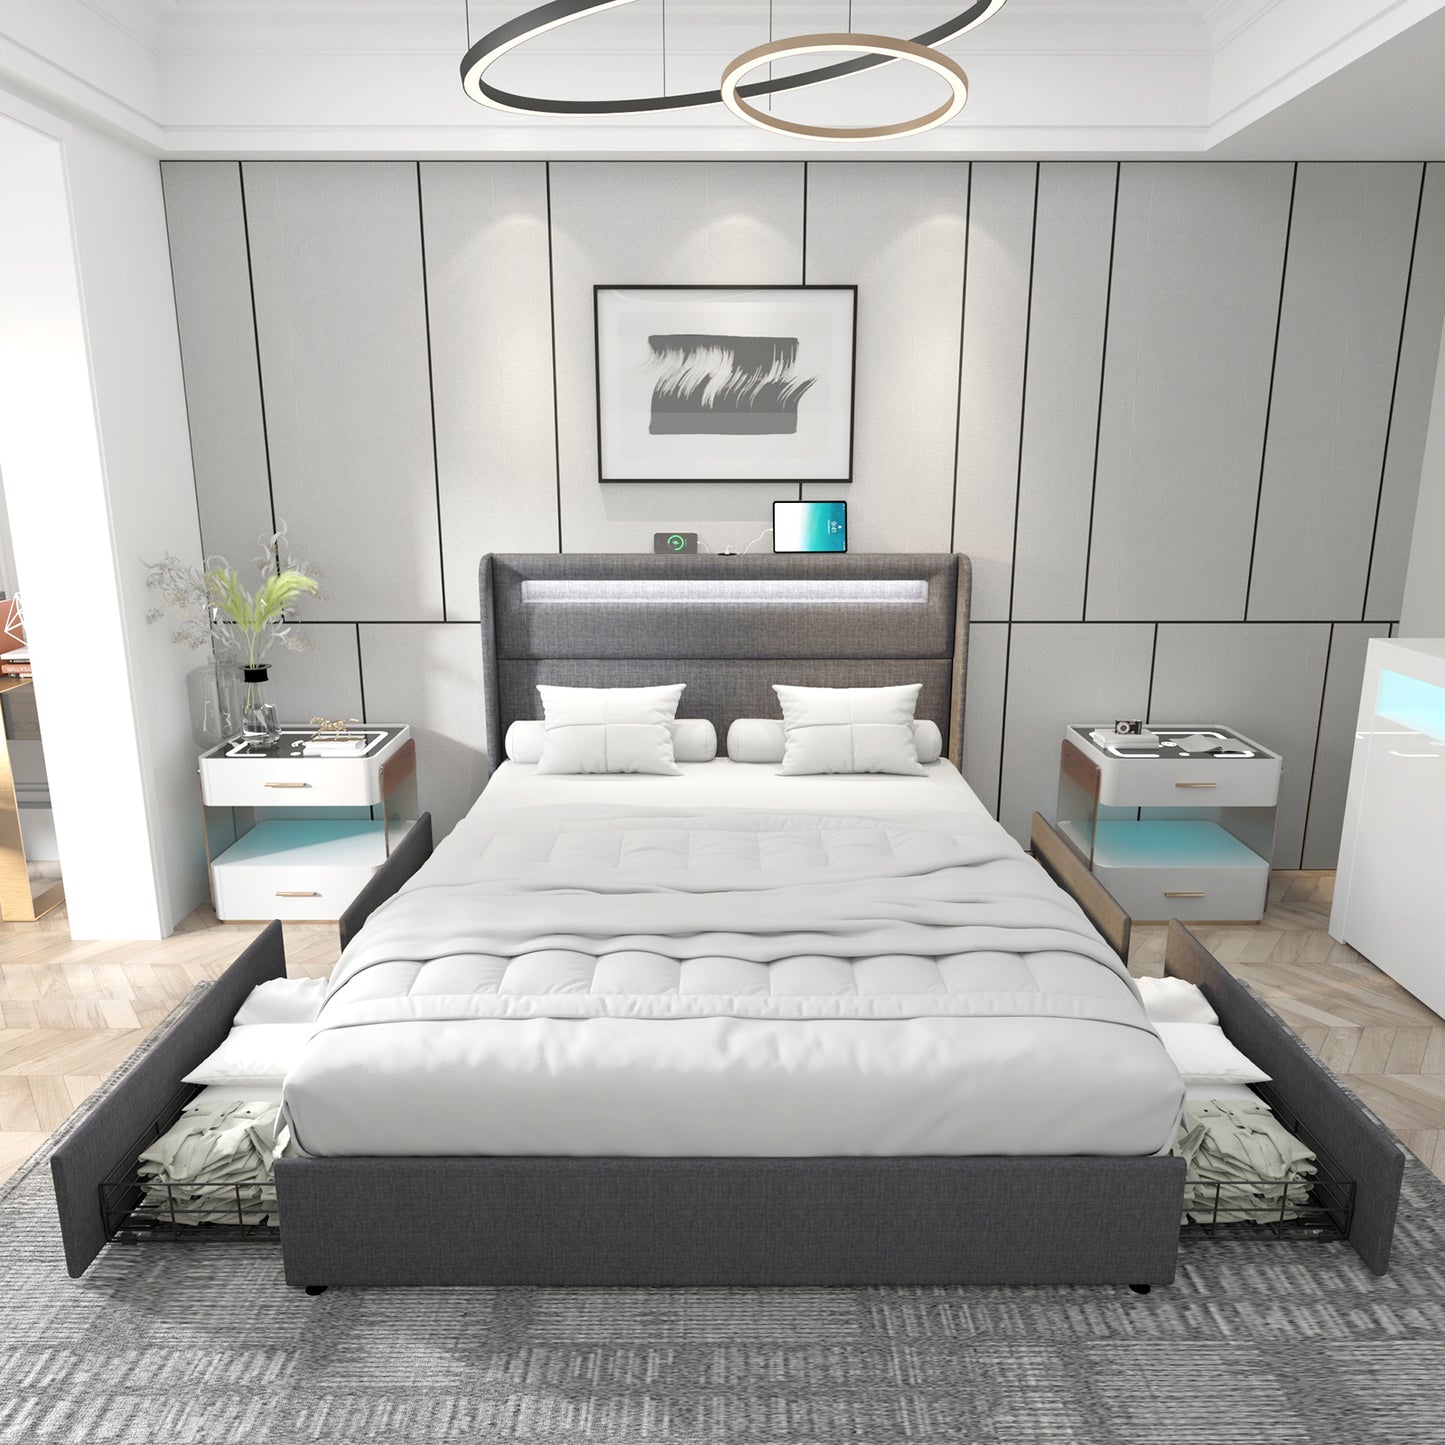 The albion queen bedframe in its light grey colored variant, showcased in a clean modern bedroom, the two front storage drawers are open showing folded bed linen stored inside. 